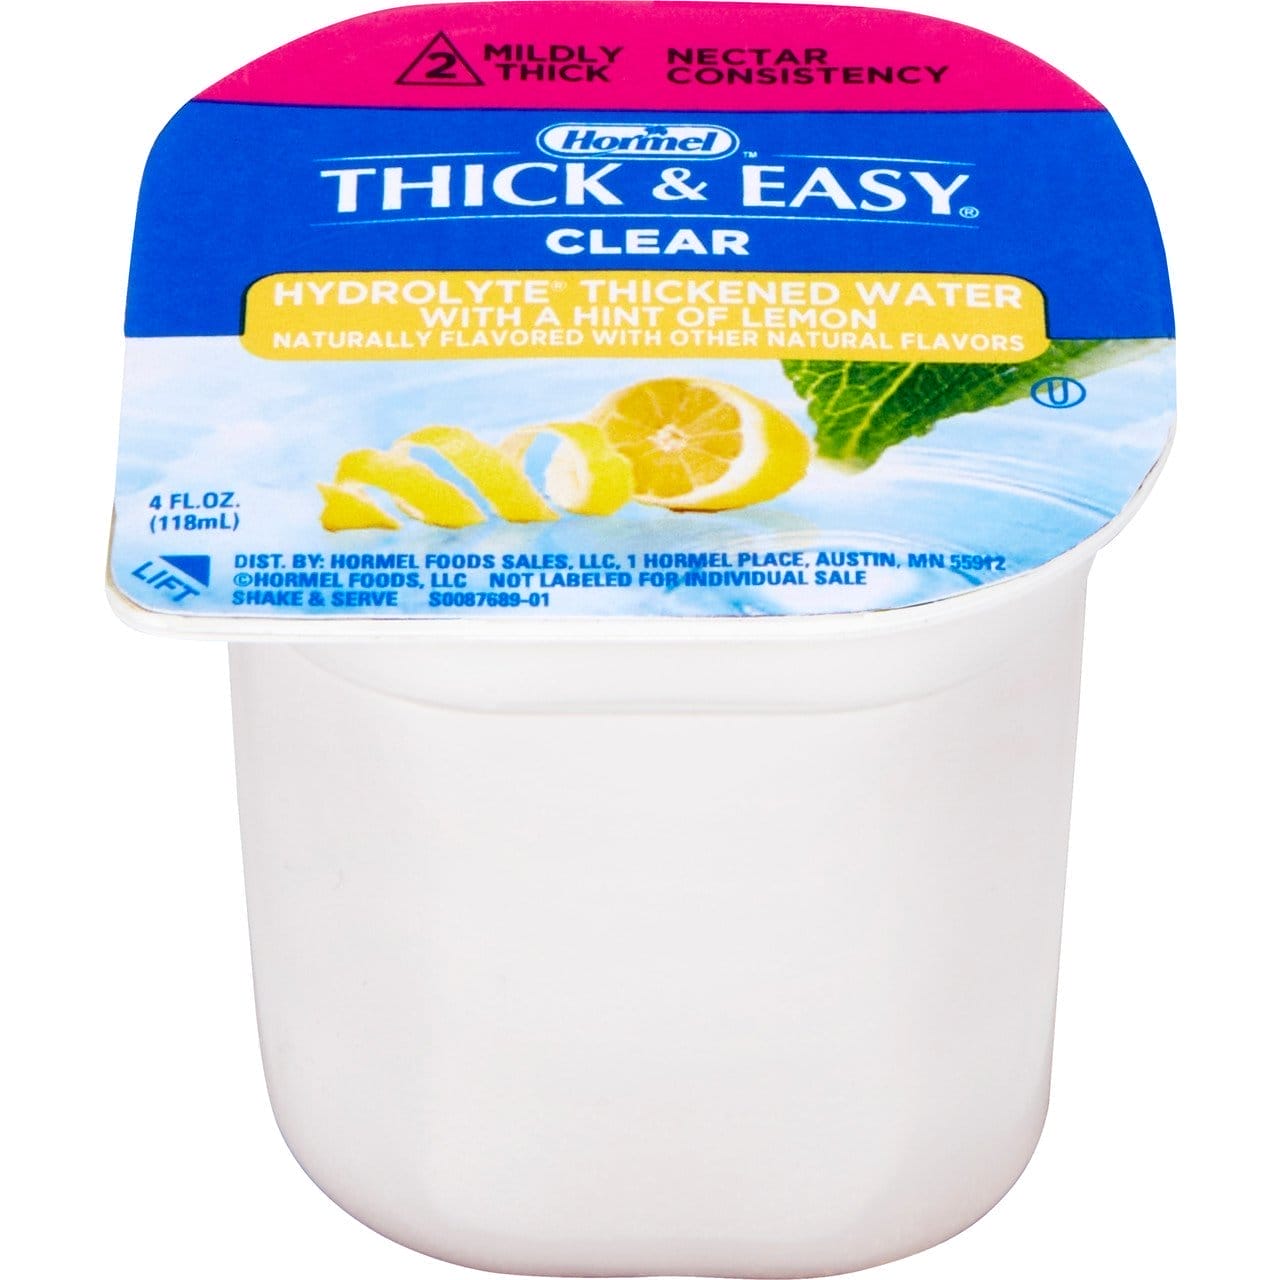 Image of Thick & Easy Hydrolyte Thickened Water, Nectar Consistency